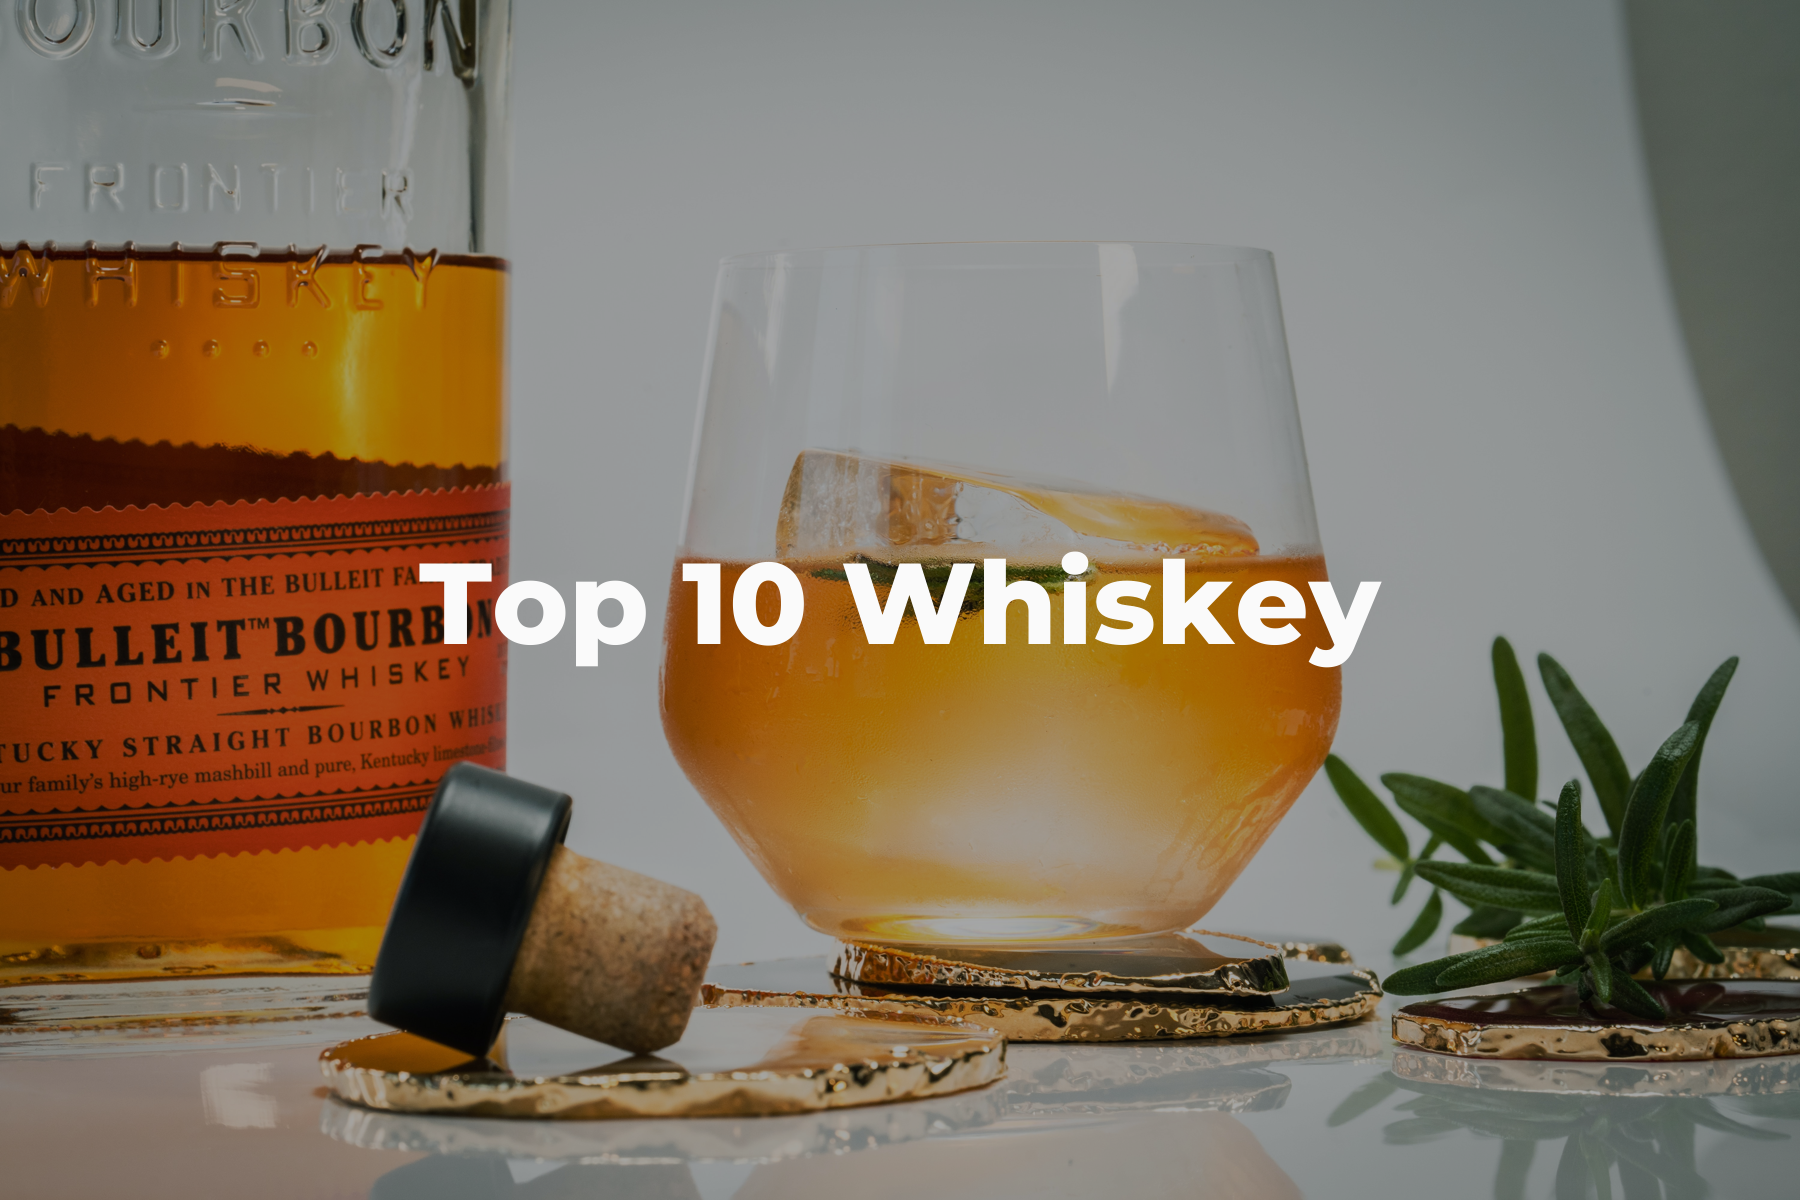 Top 10 Whiskey